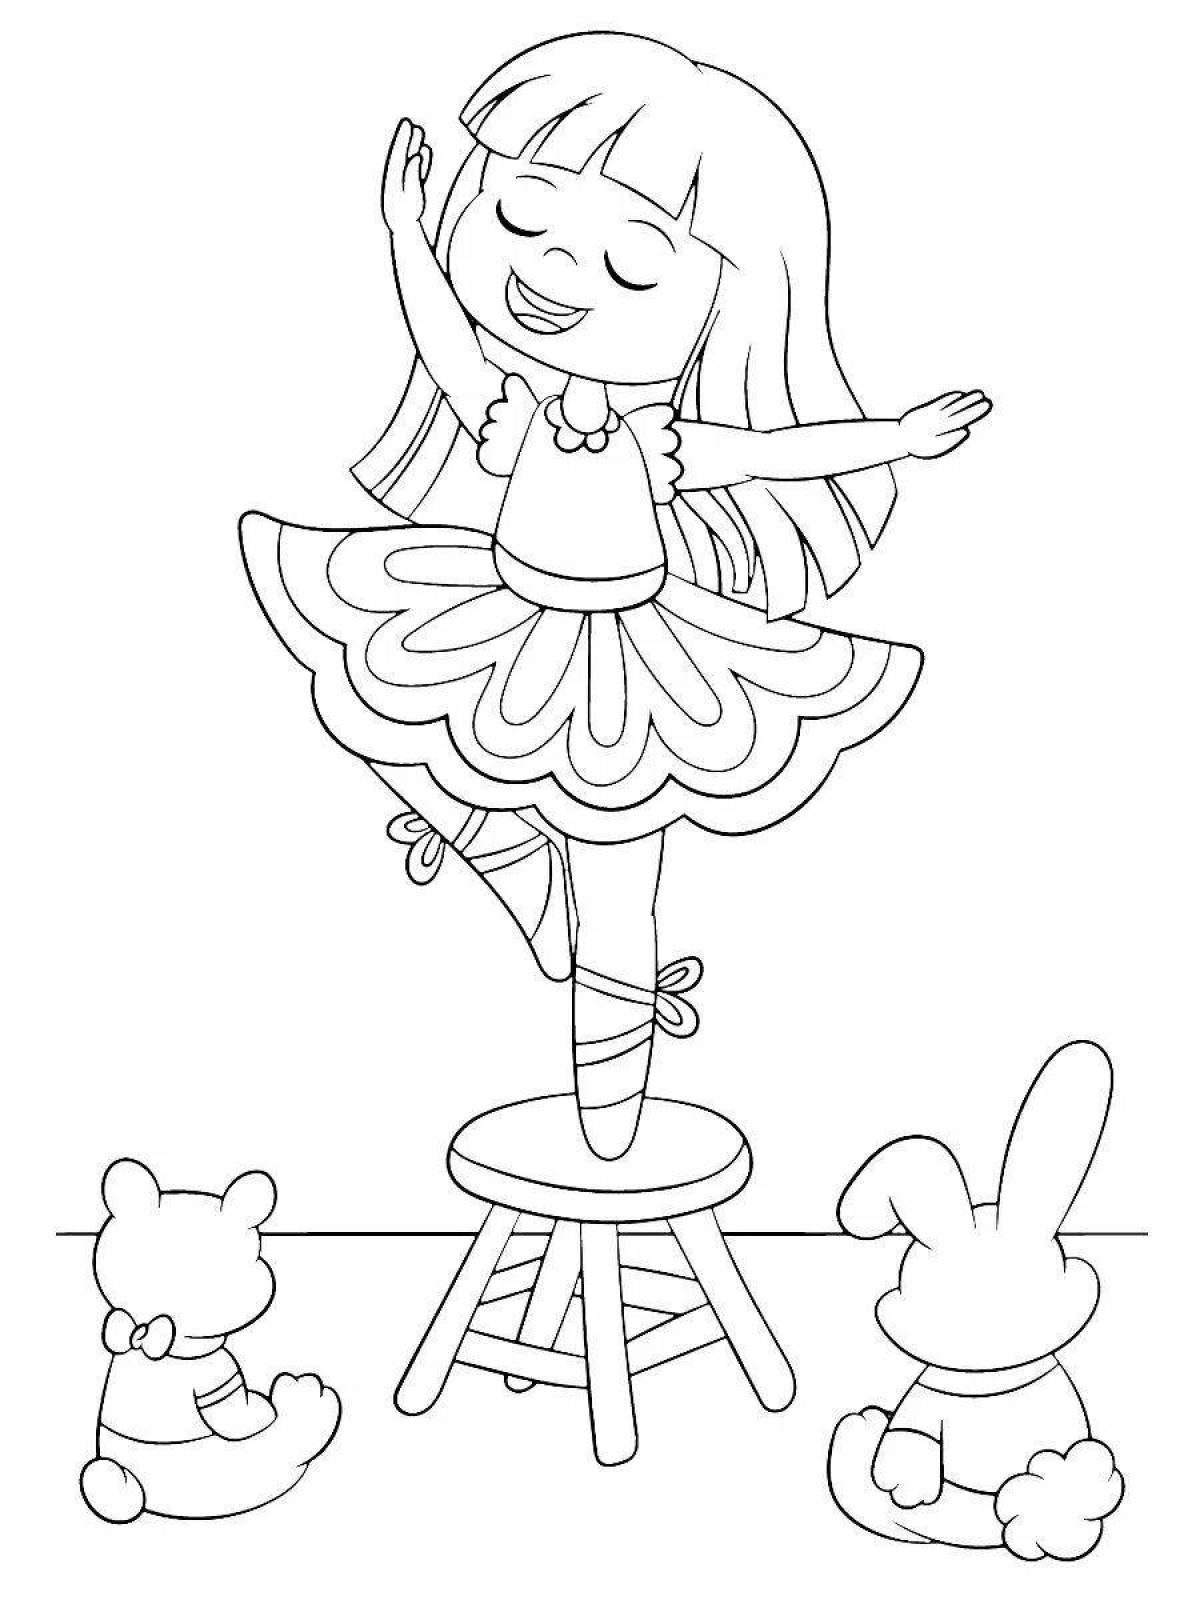 Coloring page dazzling ballerina cat